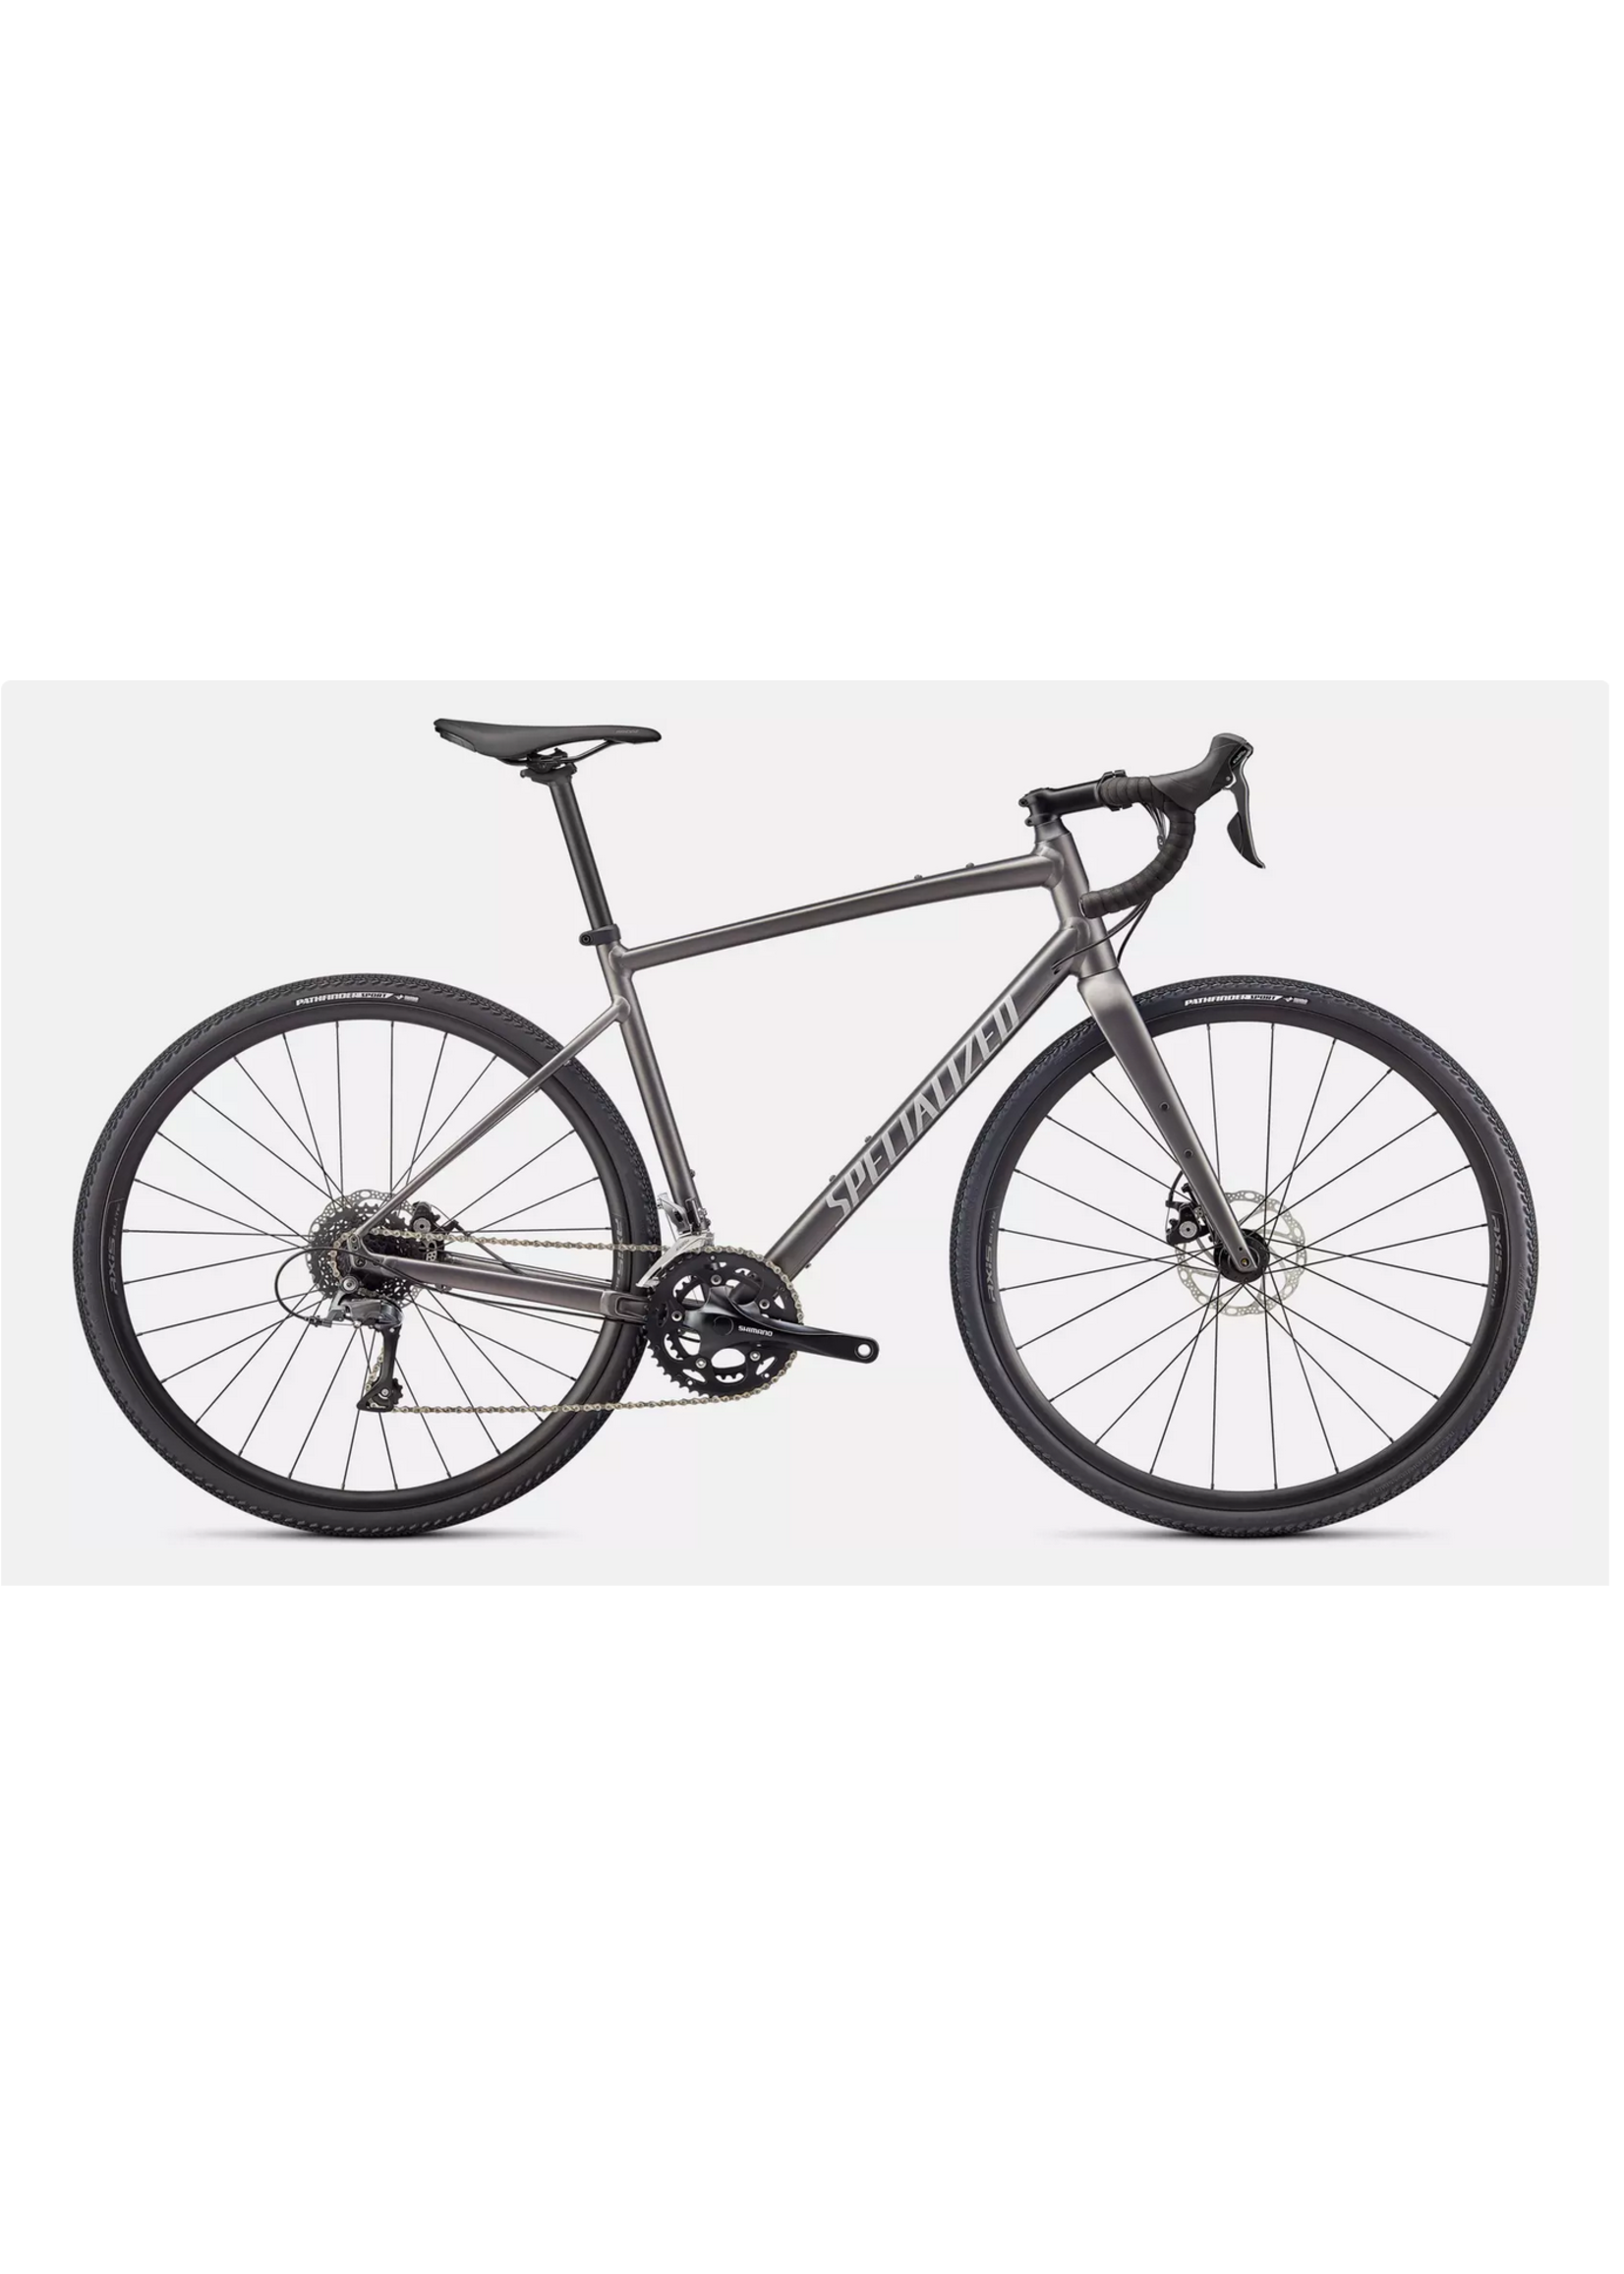 Specialized 22 DIVERGE E5 SMK/CLGRY/CHRM 54